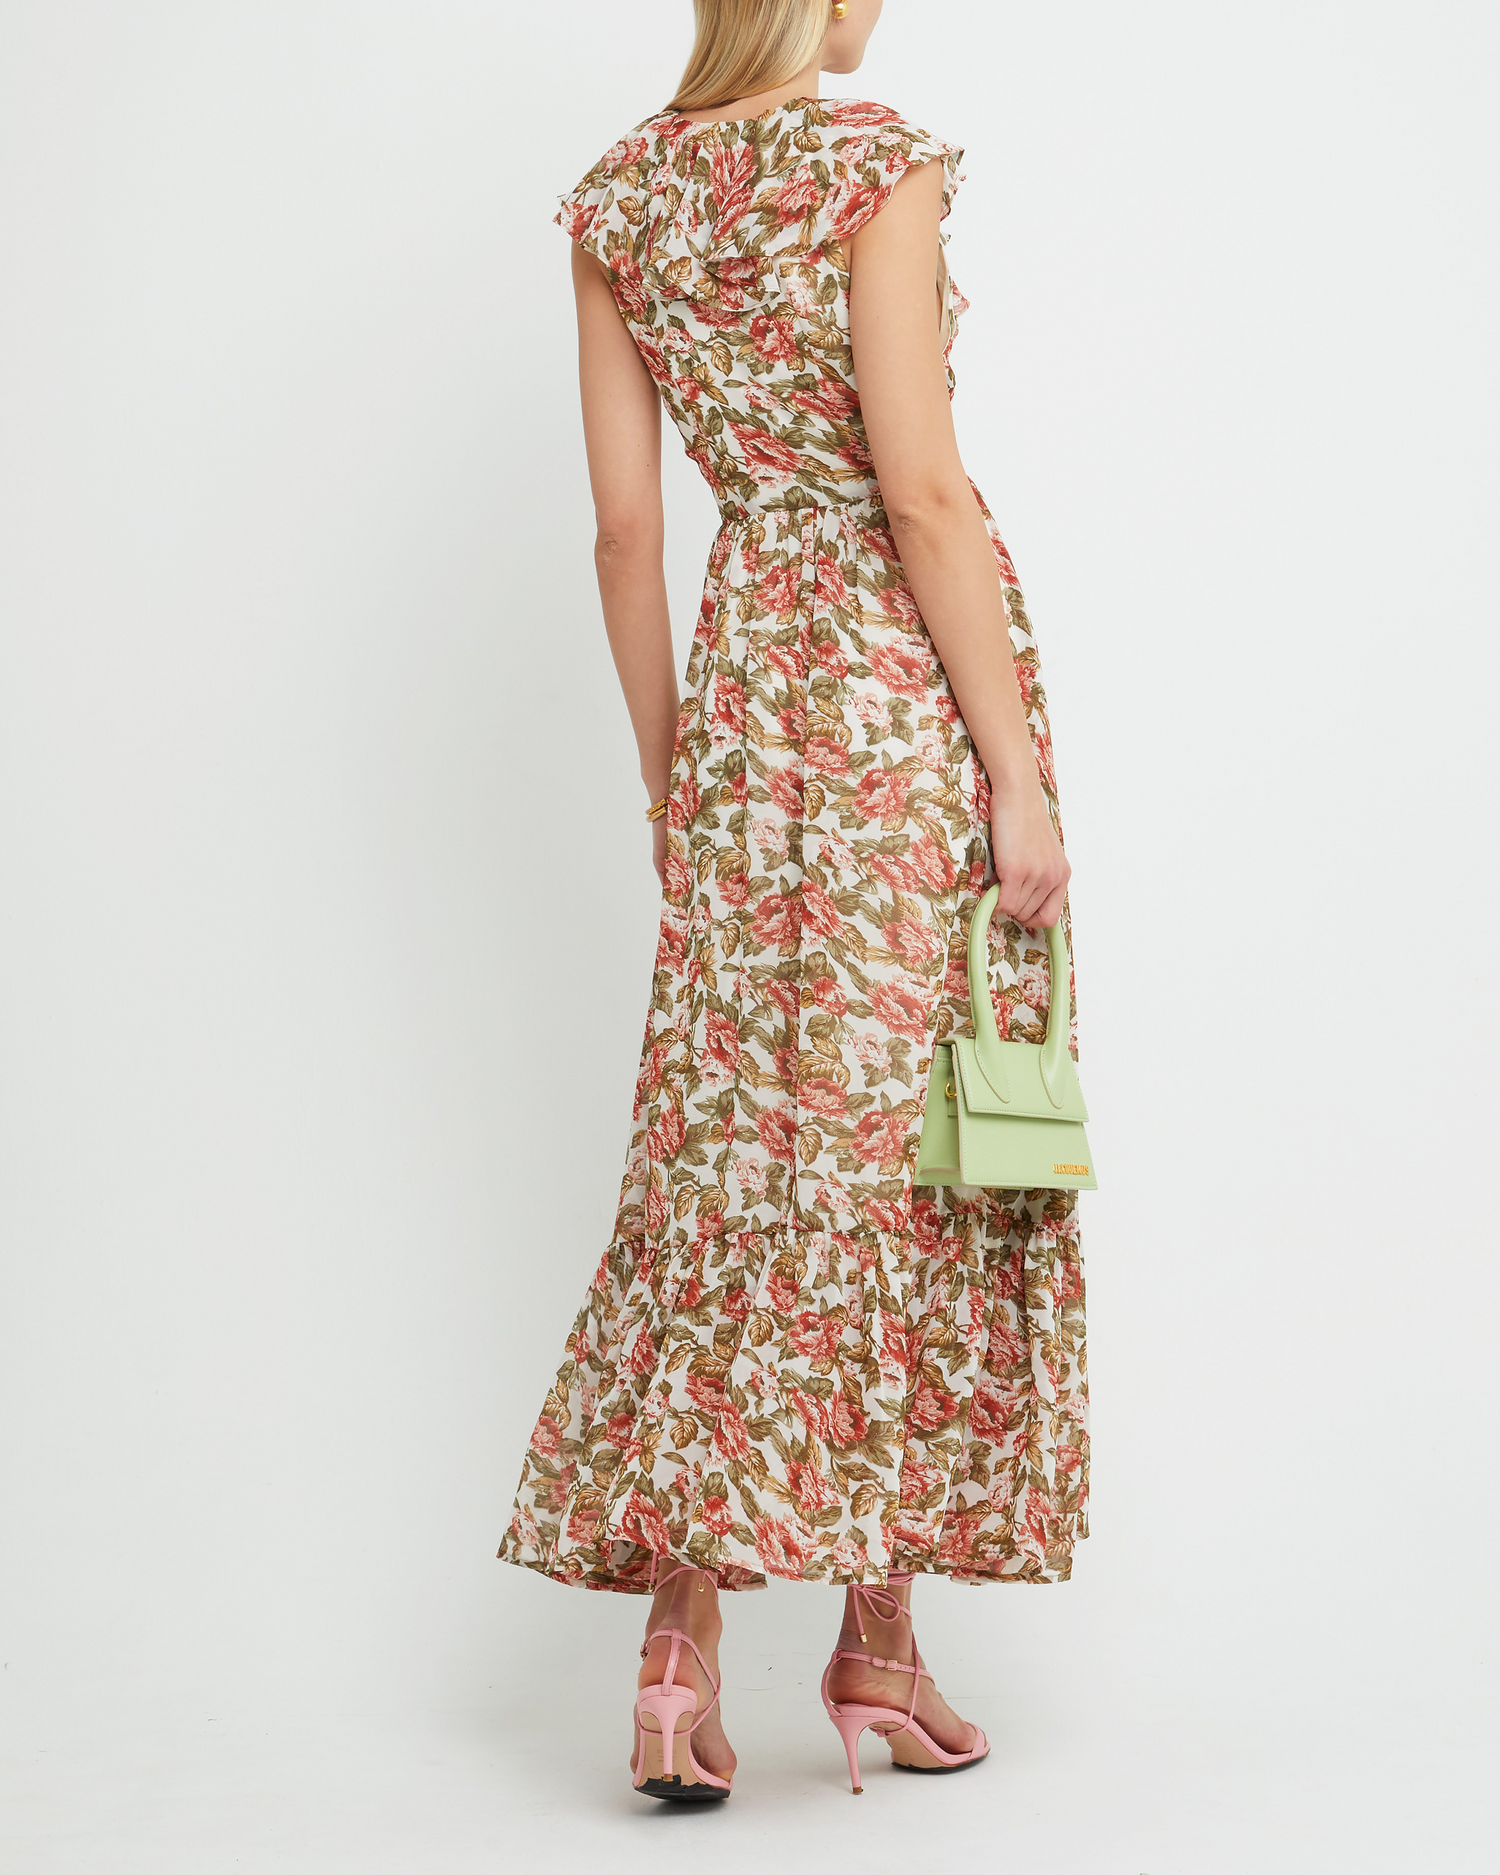 Second image of Shea Maxi Dress, a floral wedding guest dress with high side slit, flutter ruffle sleeves, v-neckline, tiered skirt, cinched waistline, side zipper, and lining